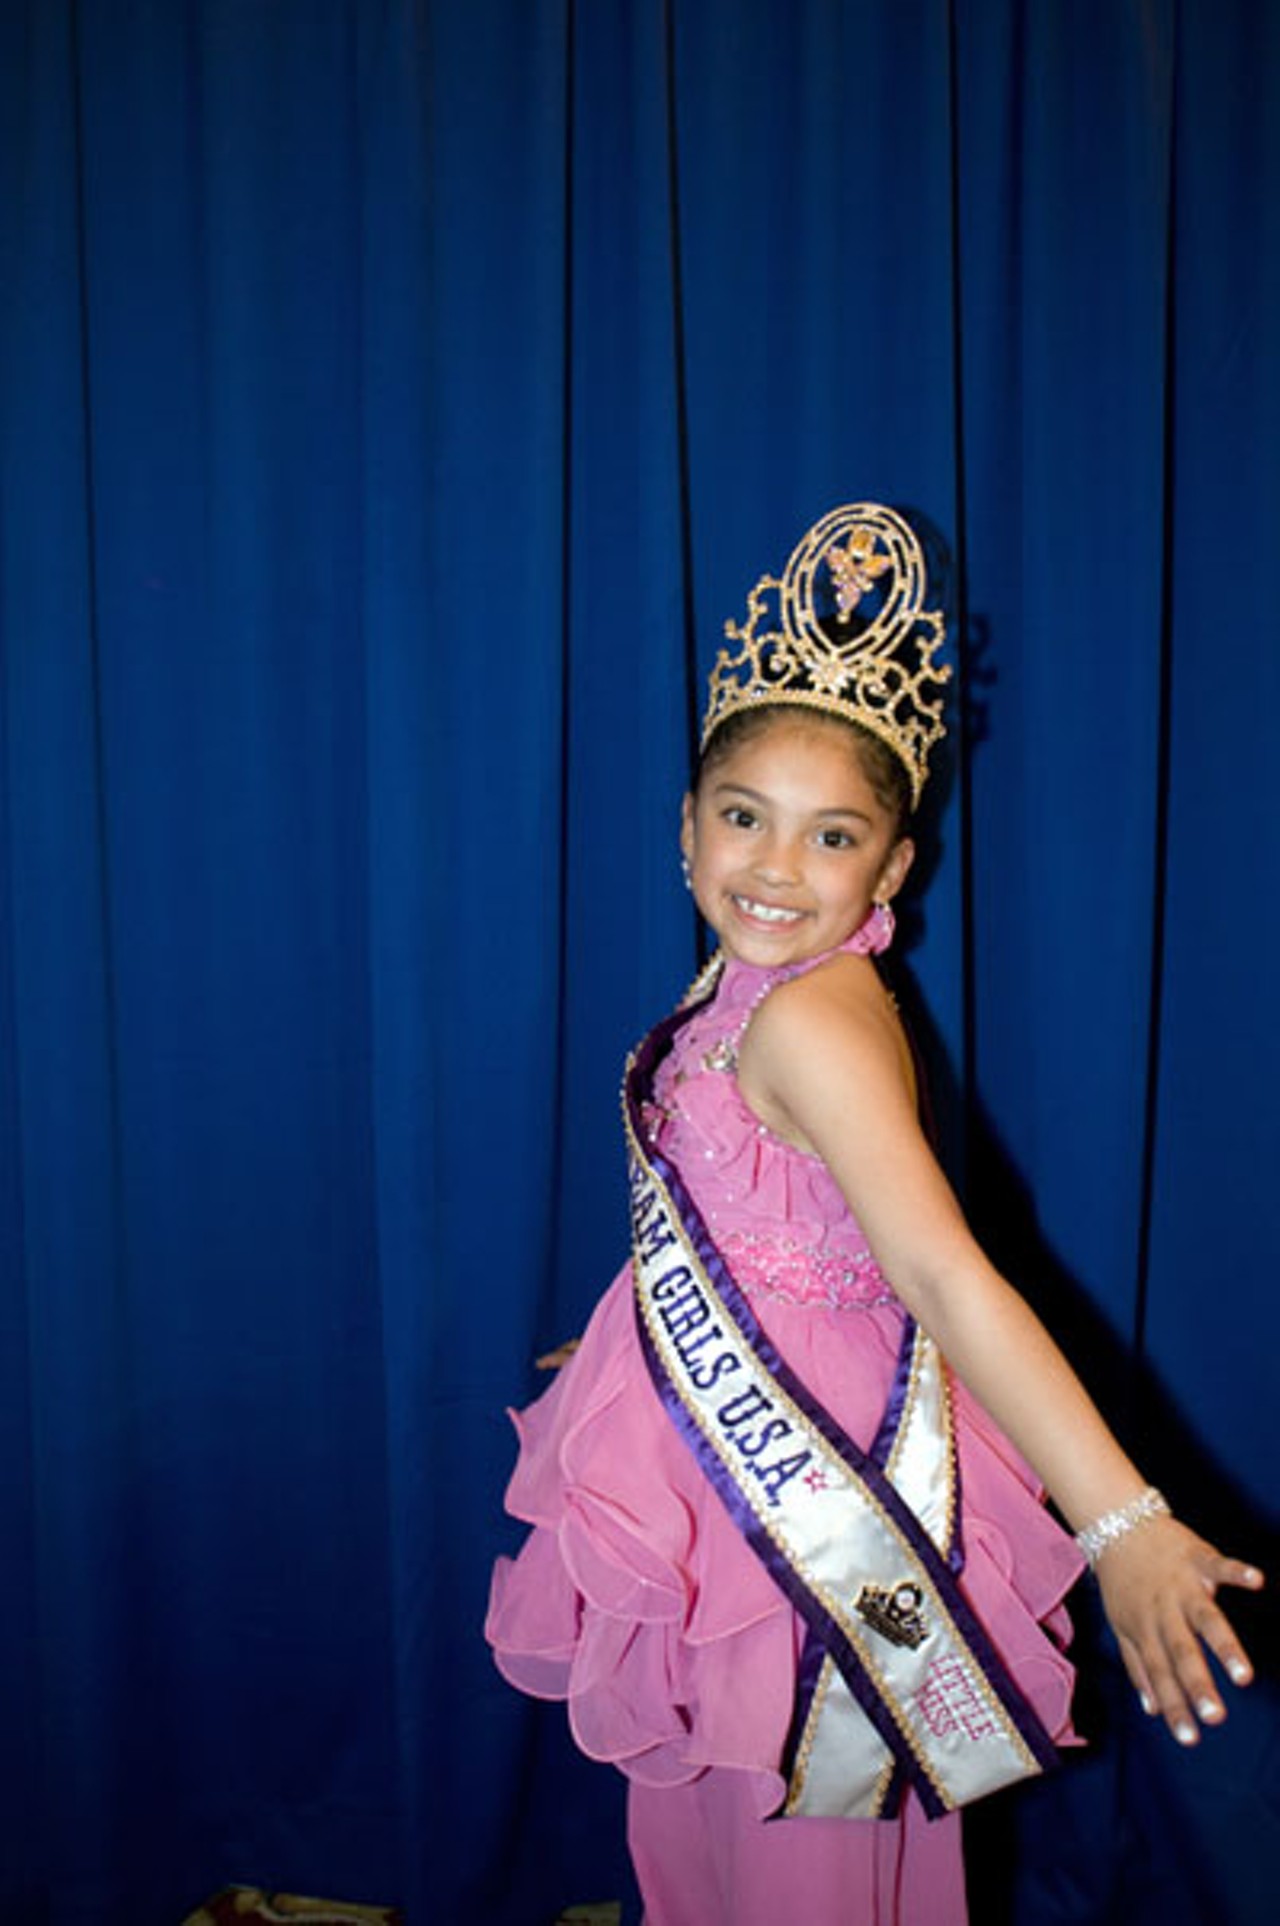 Beating Victoria, Davana and Gracie was Kassandra Lopez from Minnesota, shown being crowned Little Miss Dream Girls USA.